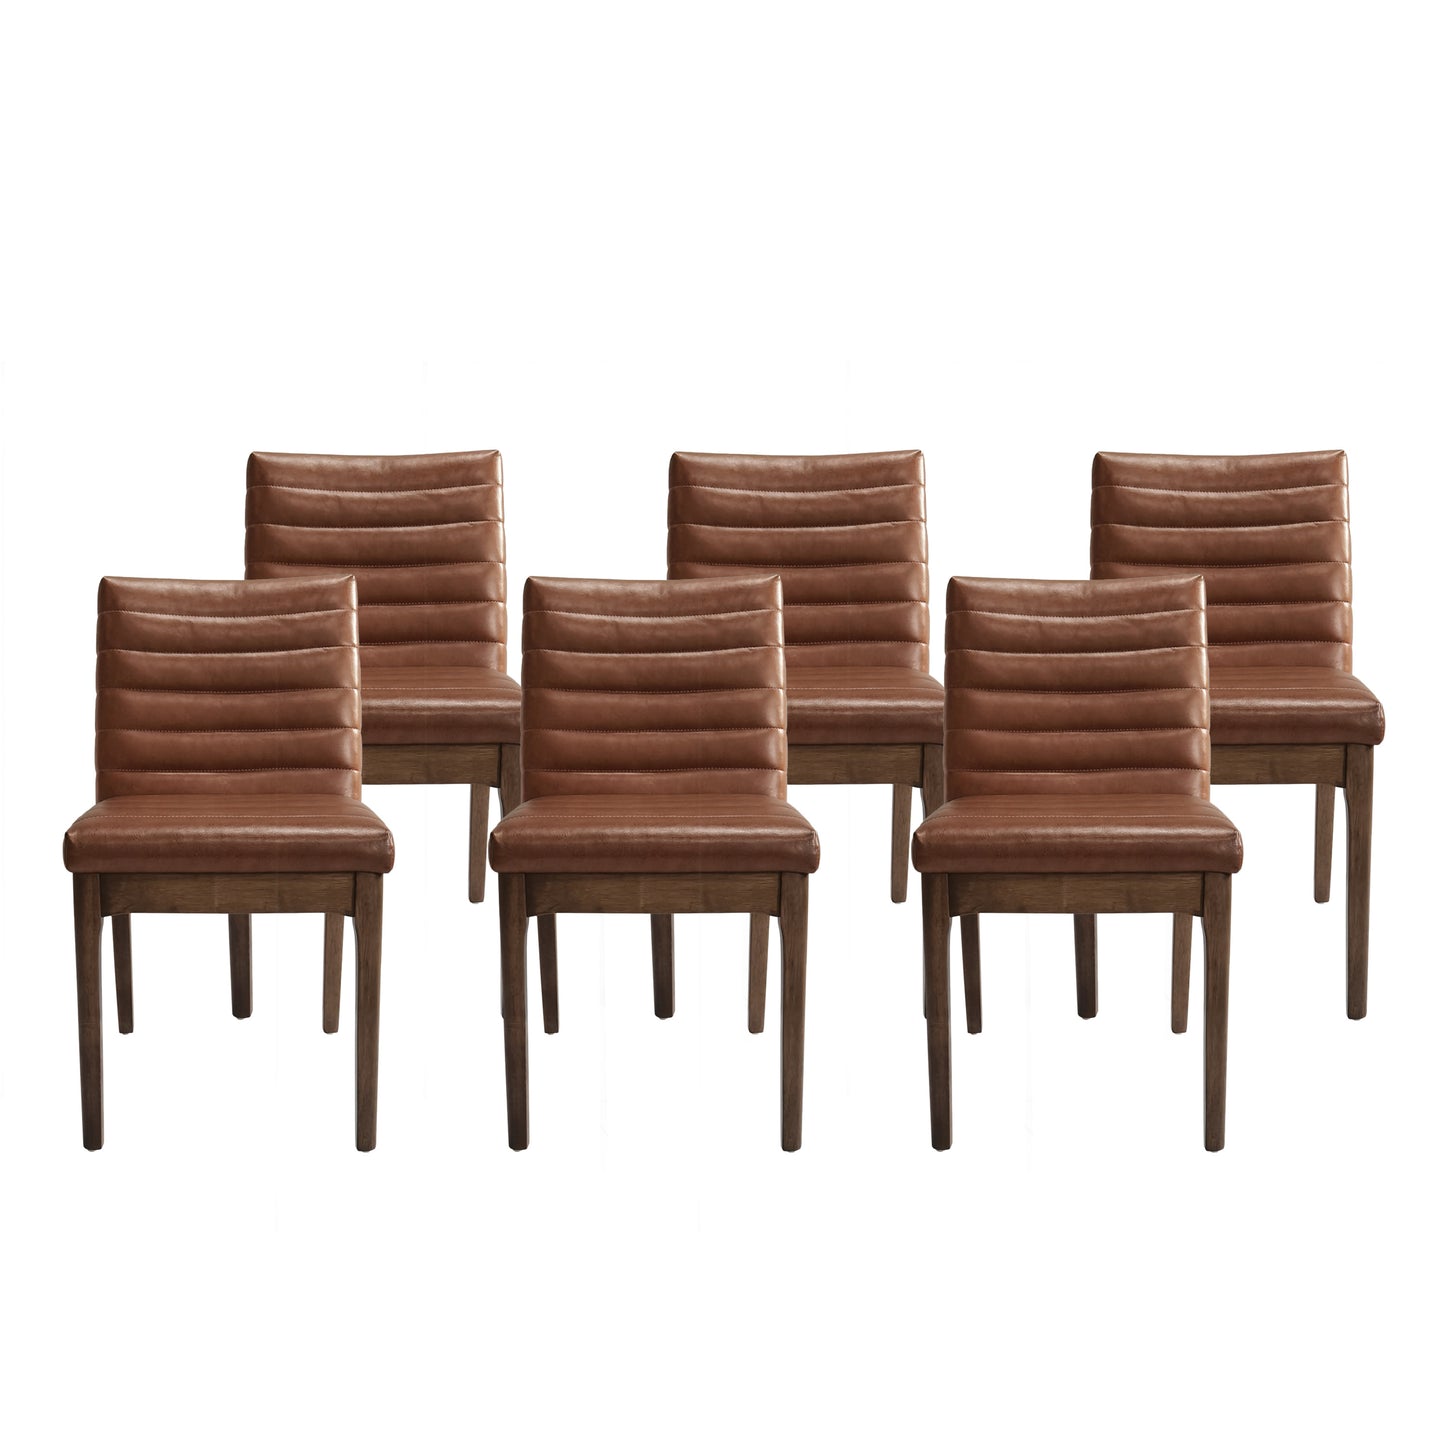 Elisson Mid Century Modern Channel Stitch Dining Chairs, Set of 6